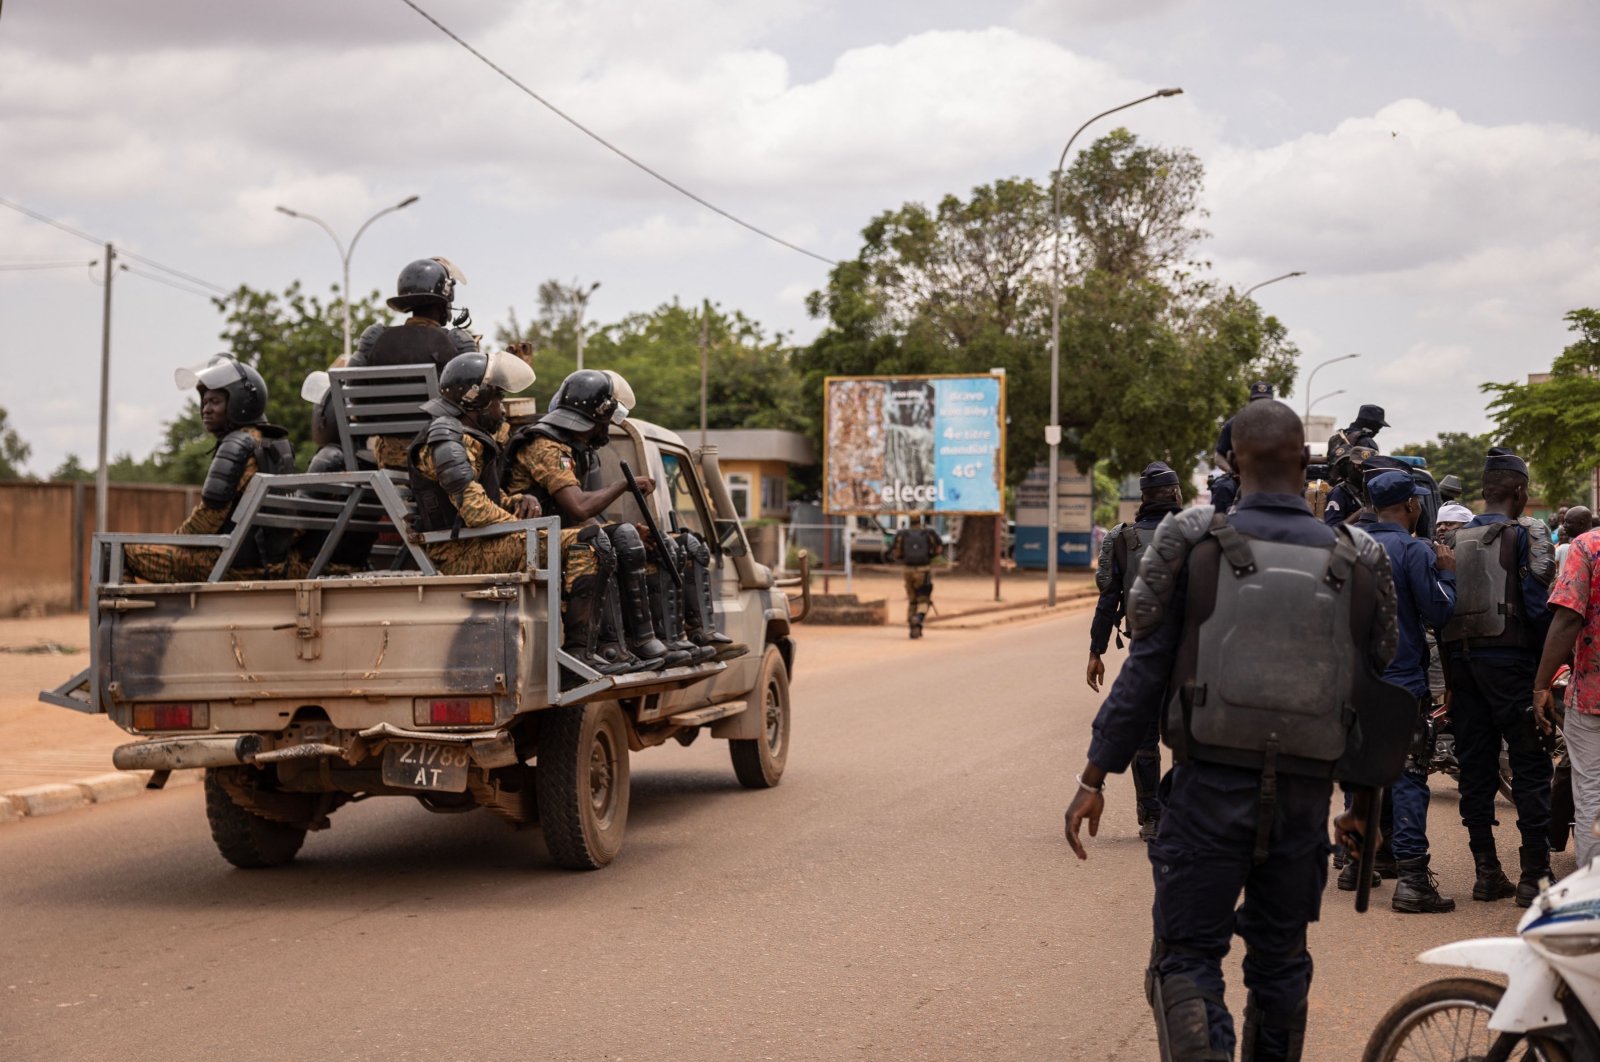 Security forces drive a vehicle near a crowd gathering awaiting the return of Blaise Compaore, former president of Burkina Faso, in front of Ouagadougou airport on July 7, 2022, eight years after he was forced into exile in Ivory Coast in 2014. (AFP Photo)